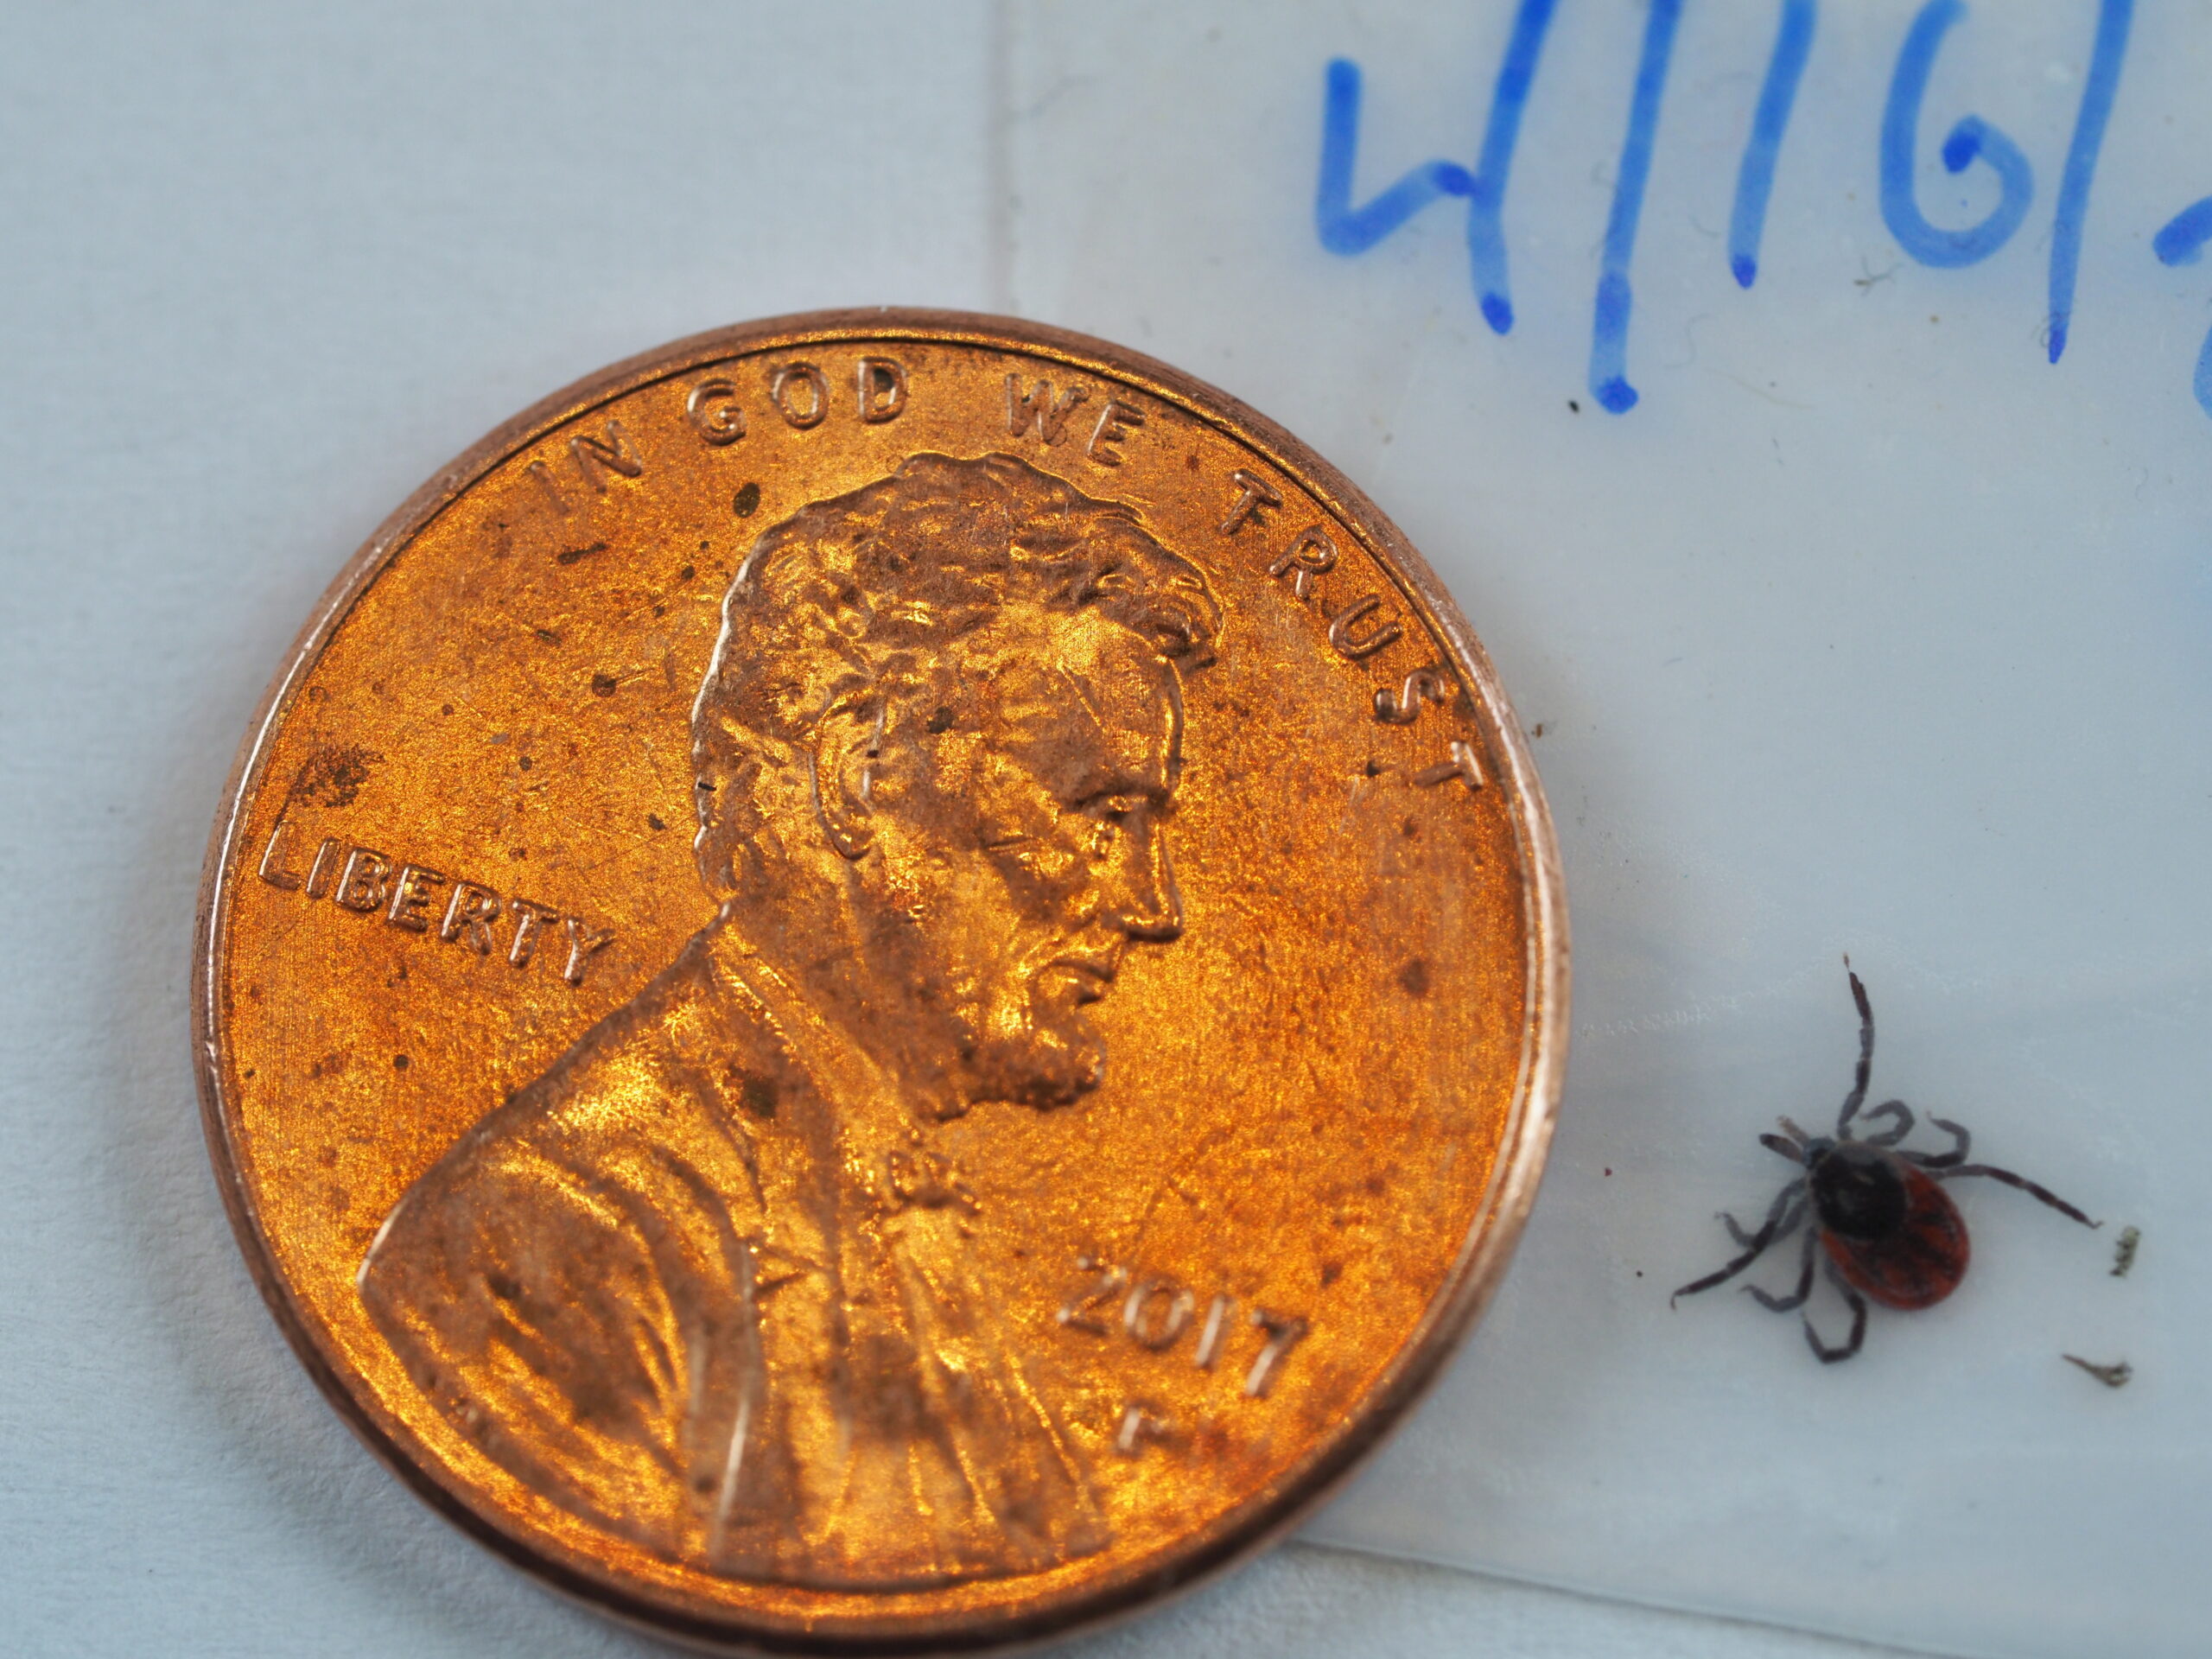 Trapped safely in a folded piece of tape and dated, this blacklegged (deer) tick was not attached long enough to cause an infection. The two short extensions at the tip of the head are like saw blades that the tick uses to make a puncture then draw blood with a different mouthpart.